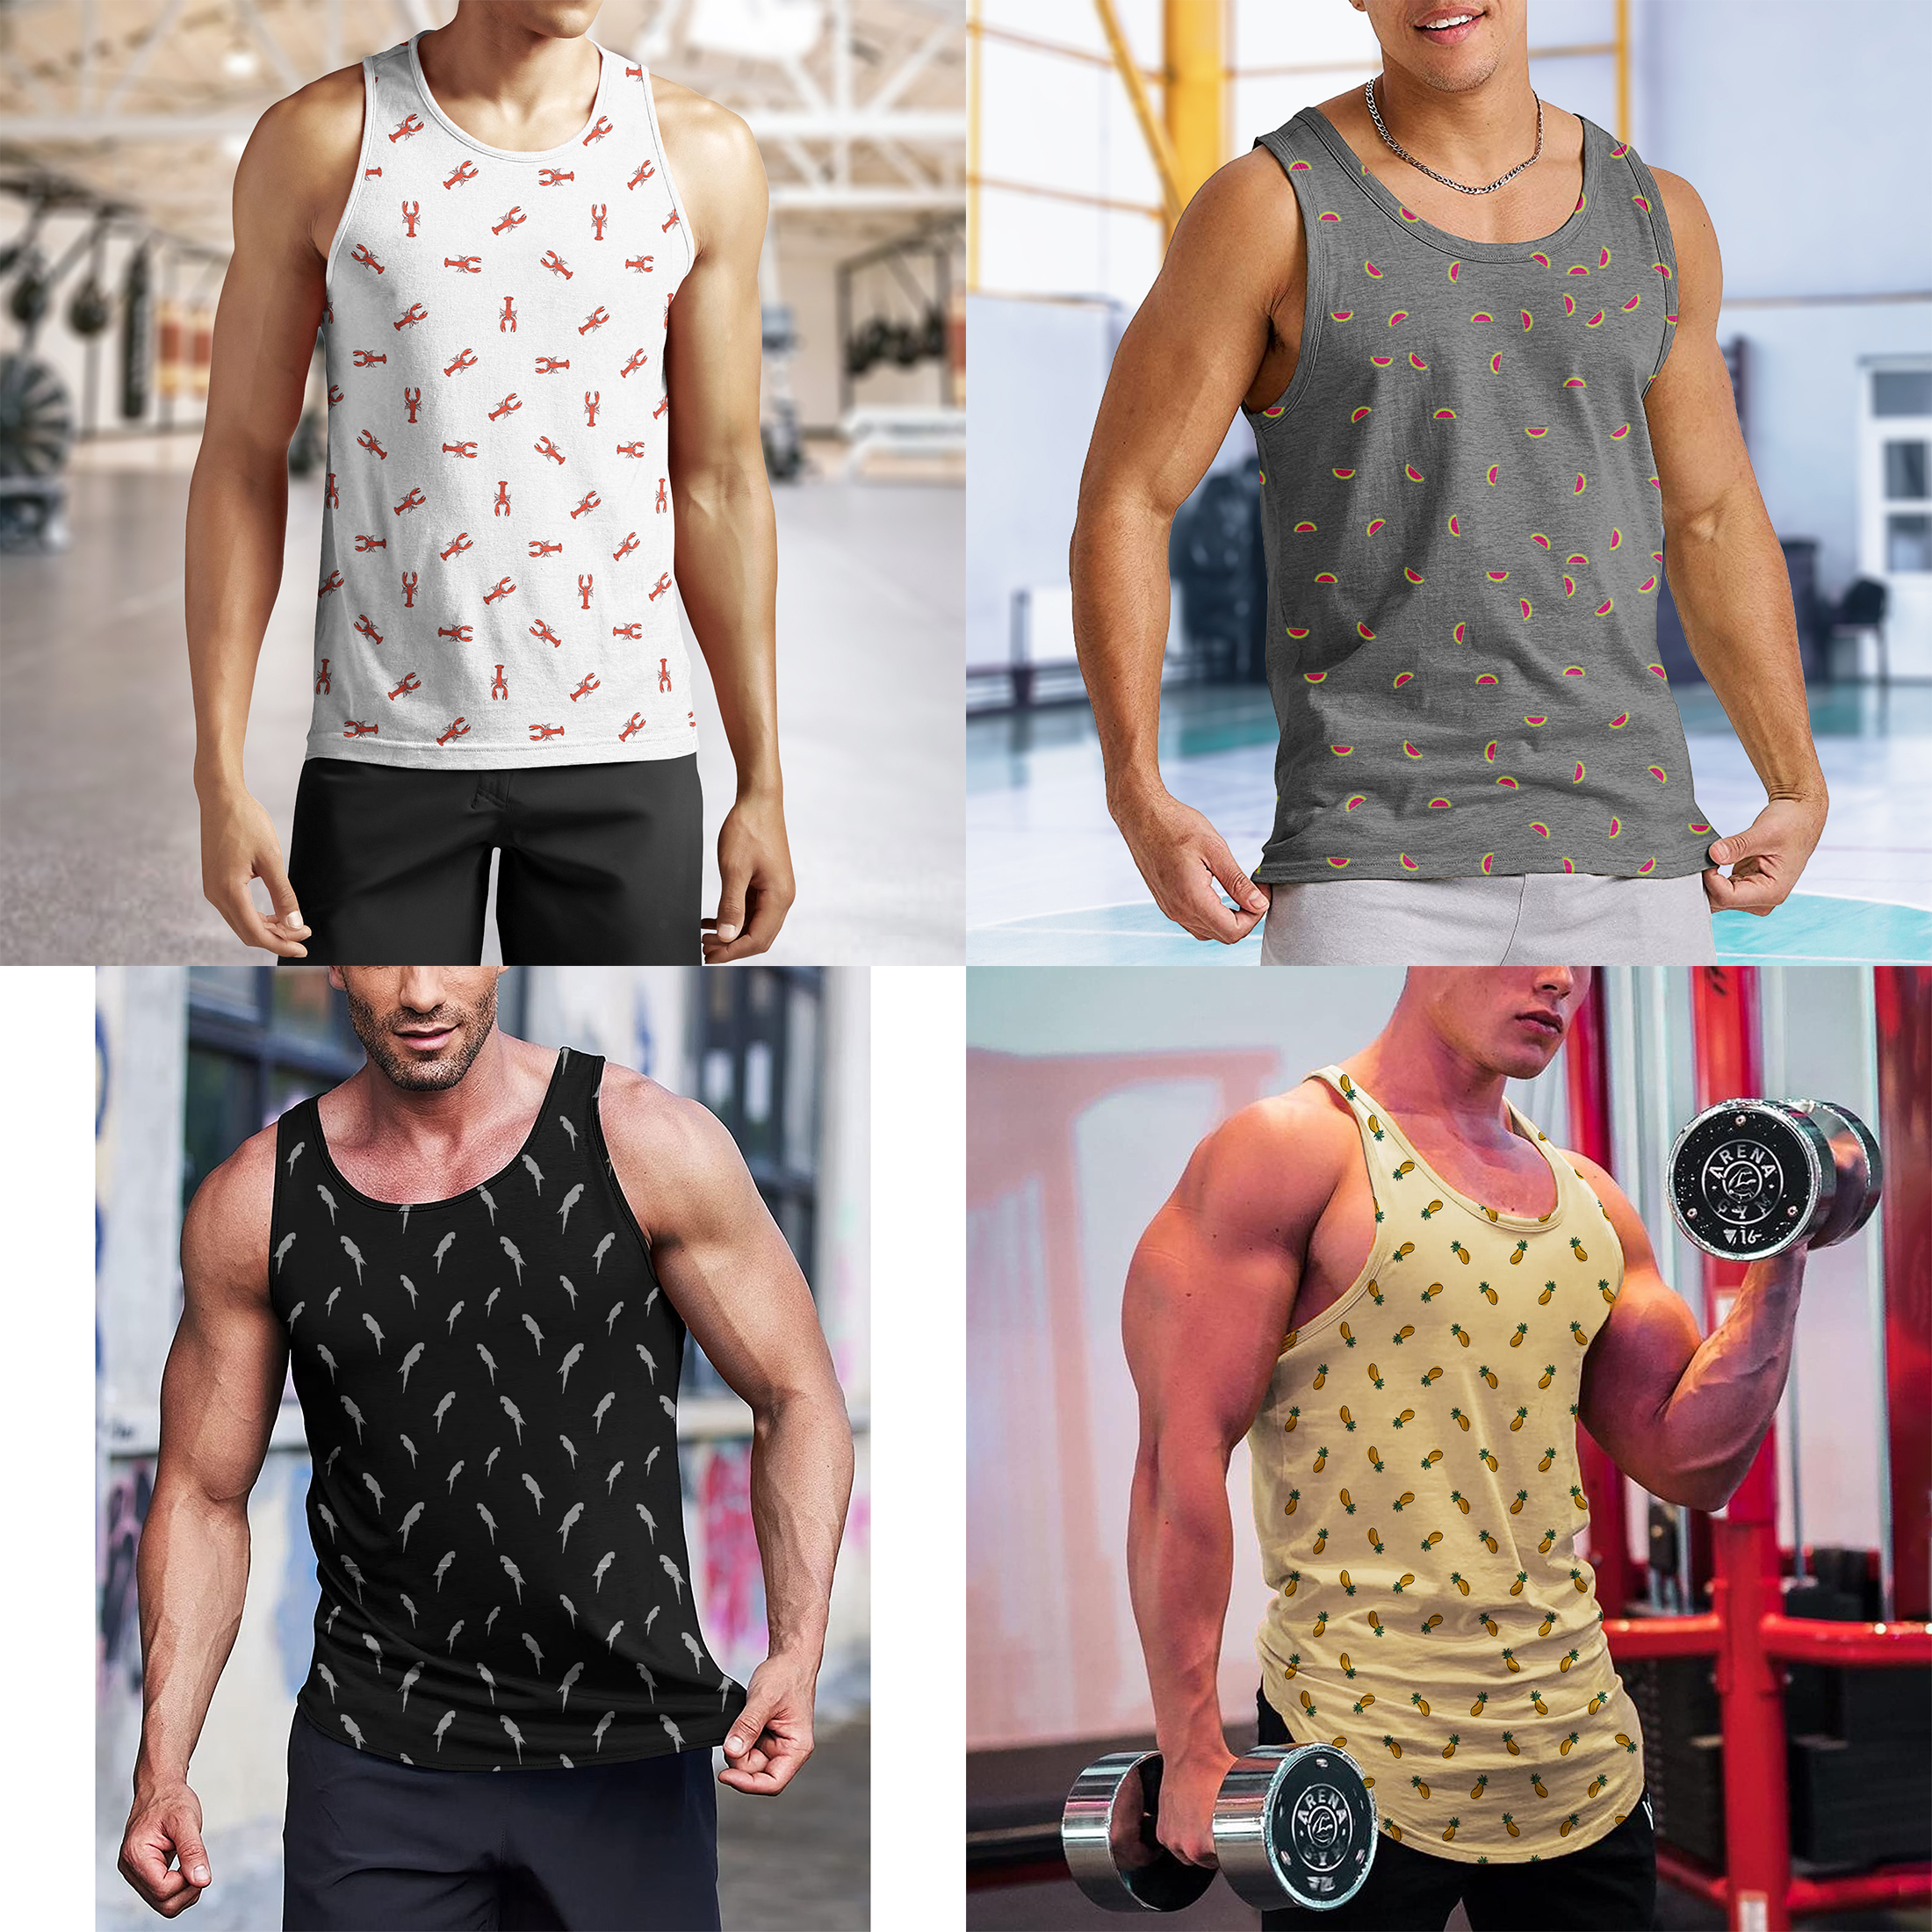 4-Pack Men's Muscle Tank Tops Active Athletic Crew Neck Moisture Wicking Quick Dry Breathable Sleeveless Fitness Shirts Gym Workout Tees - S